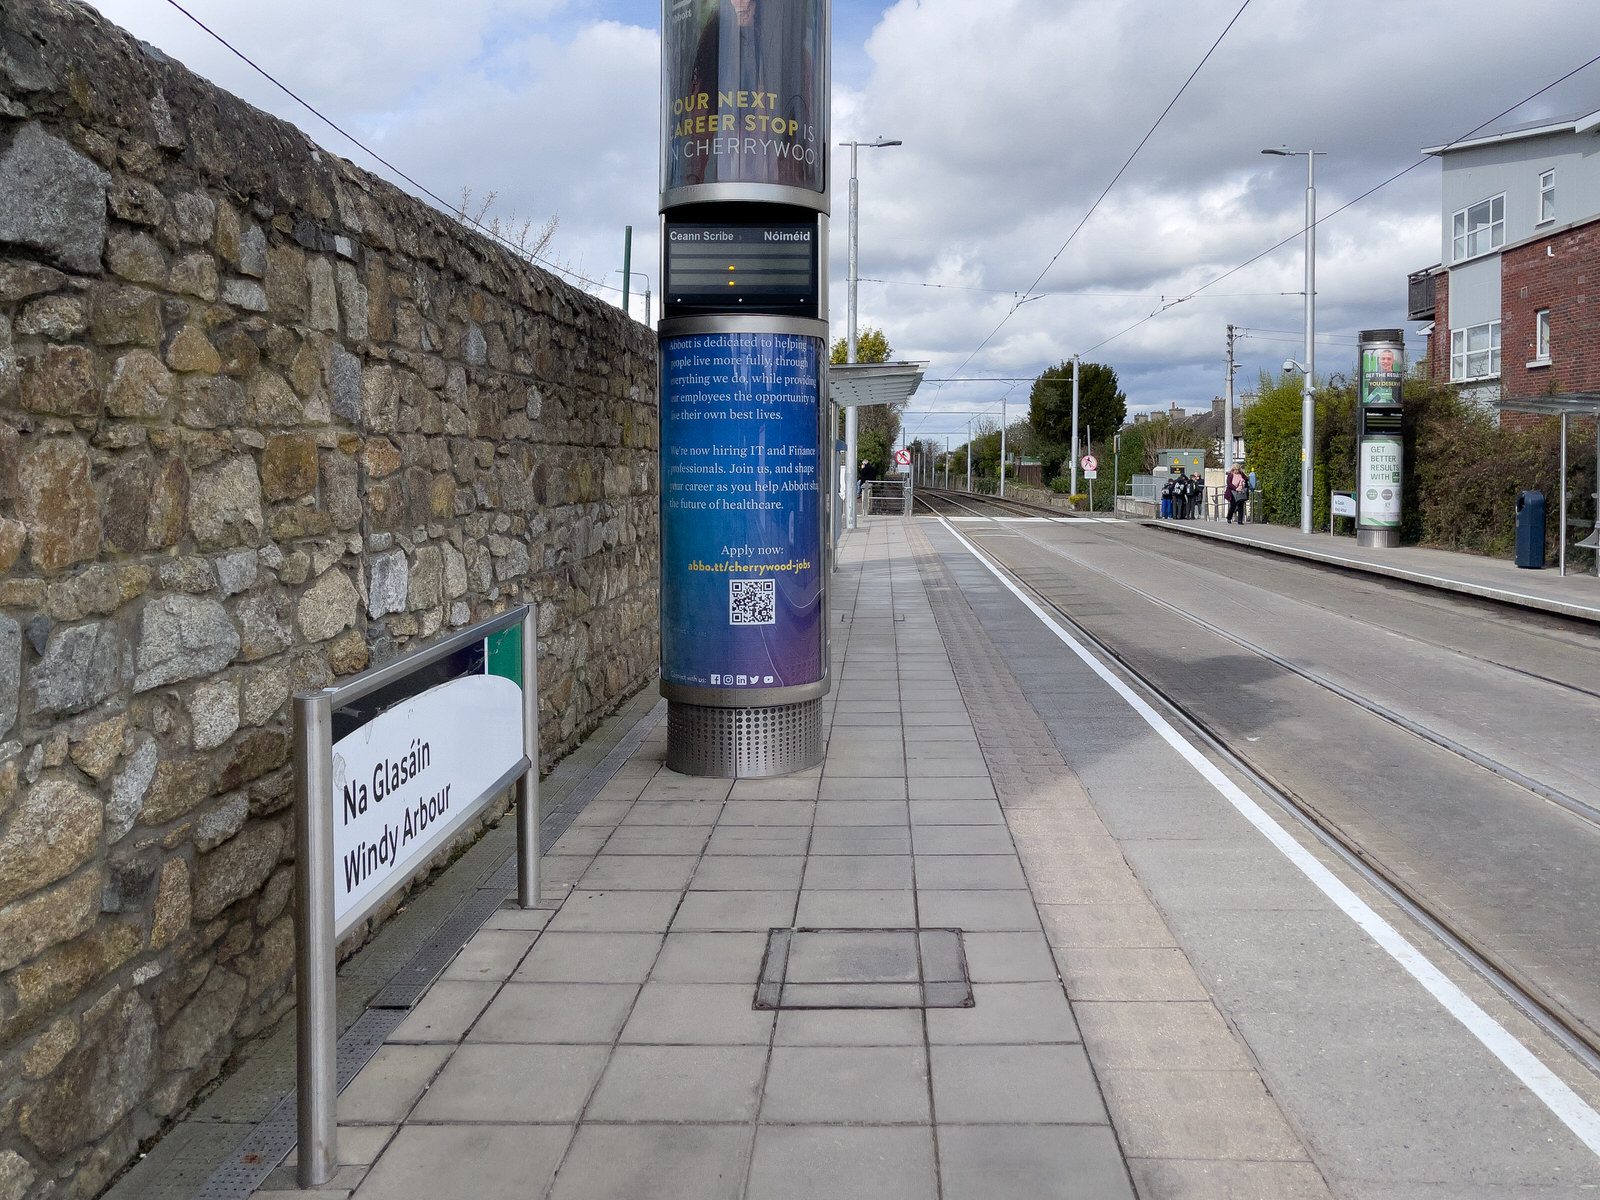 THE LUAS TRAM STOP AT WINDY ARBOUR AND THE IMMEDIATE AREA 033